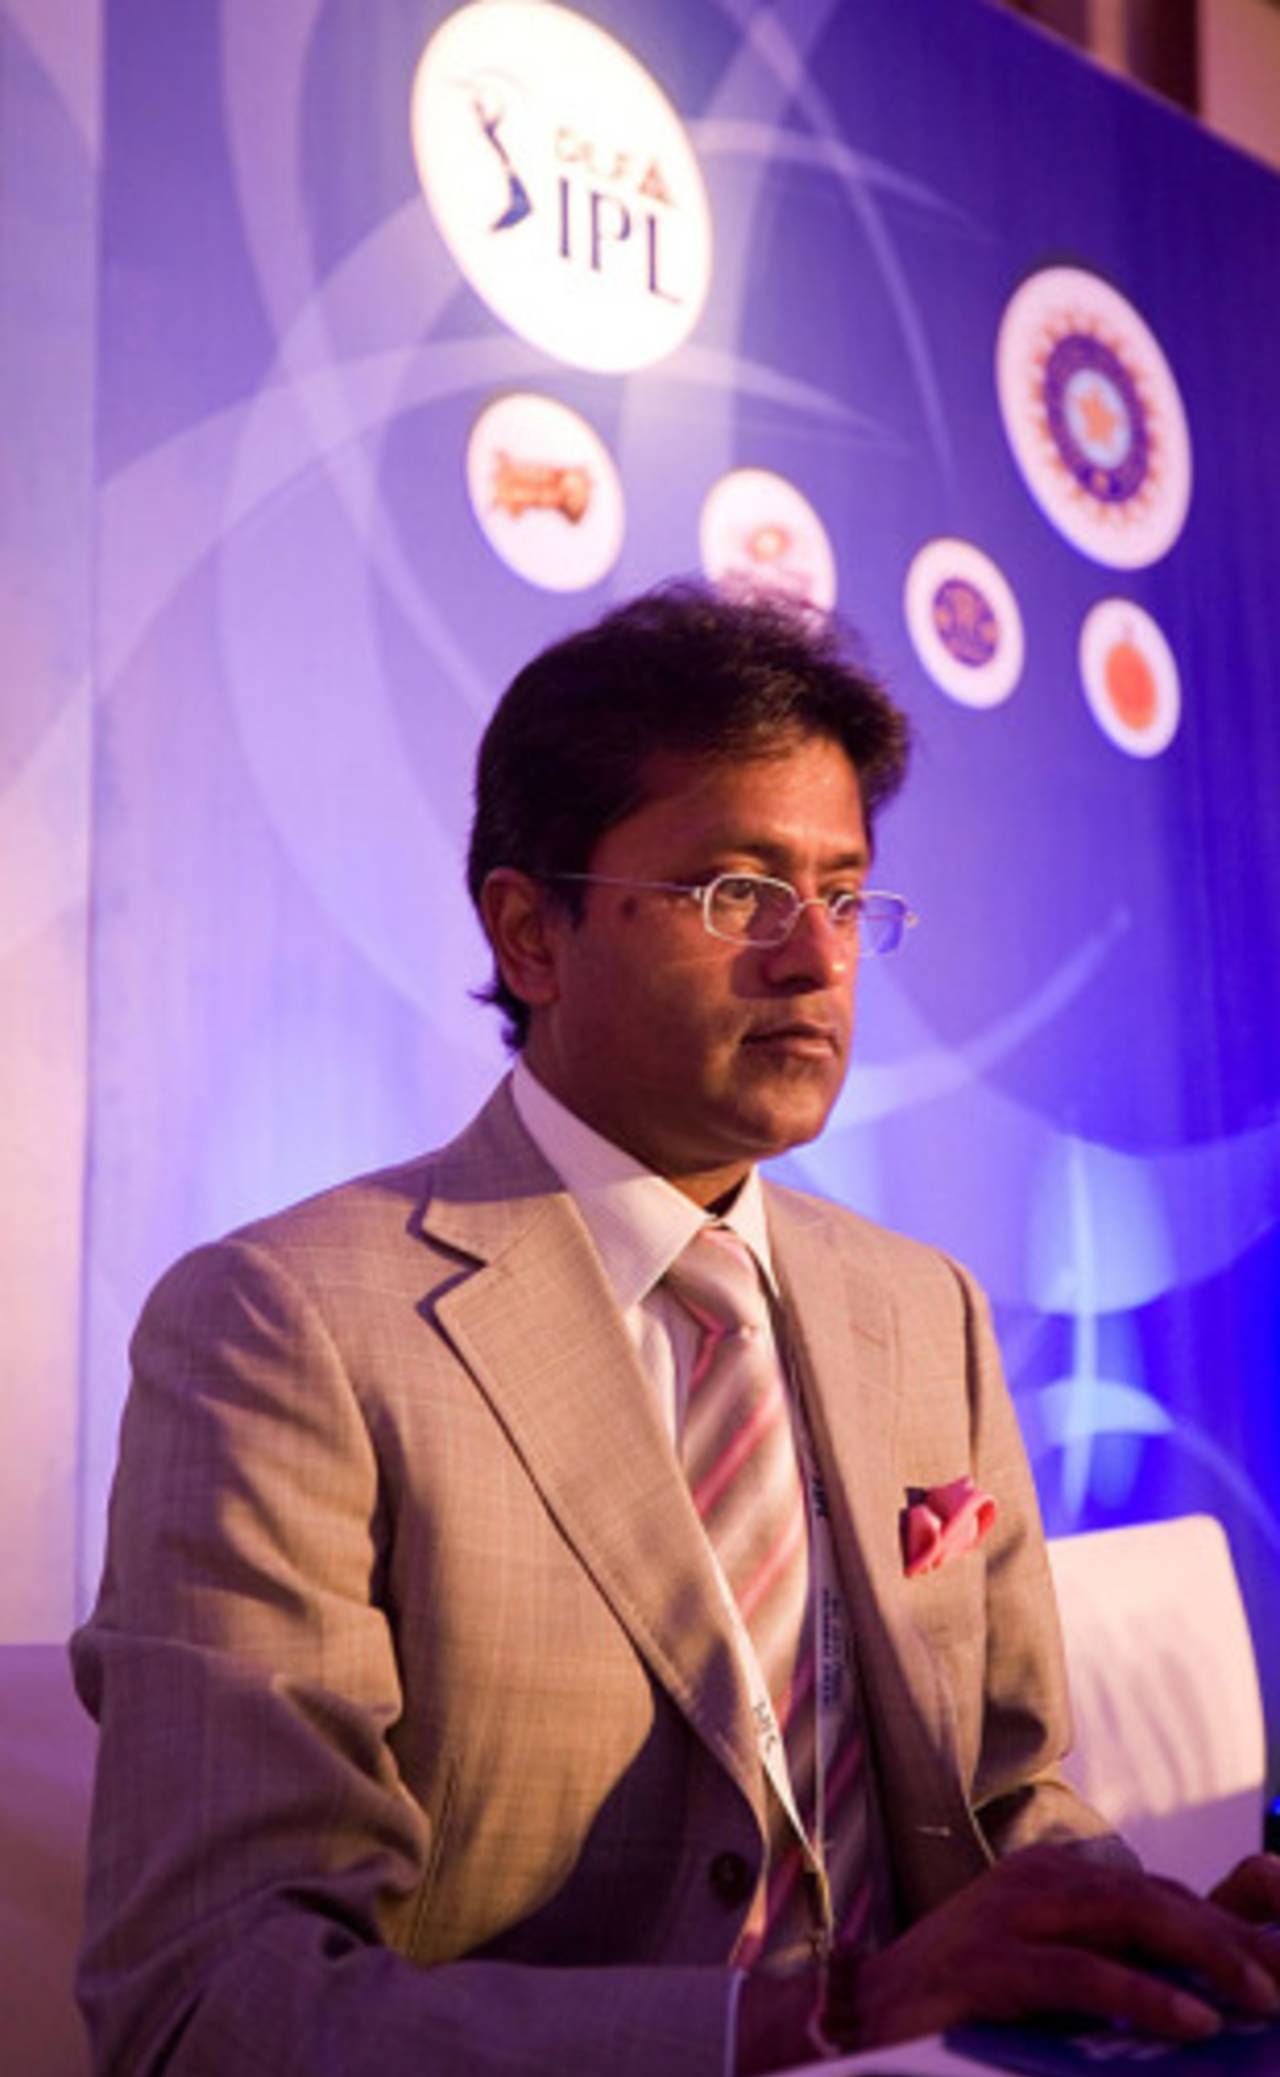 Lalit Modi has demanded details of the "reliable source" who has made allegations against him to the BCCI&nbsp;&nbsp;&bull;&nbsp;&nbsp;Getty Images